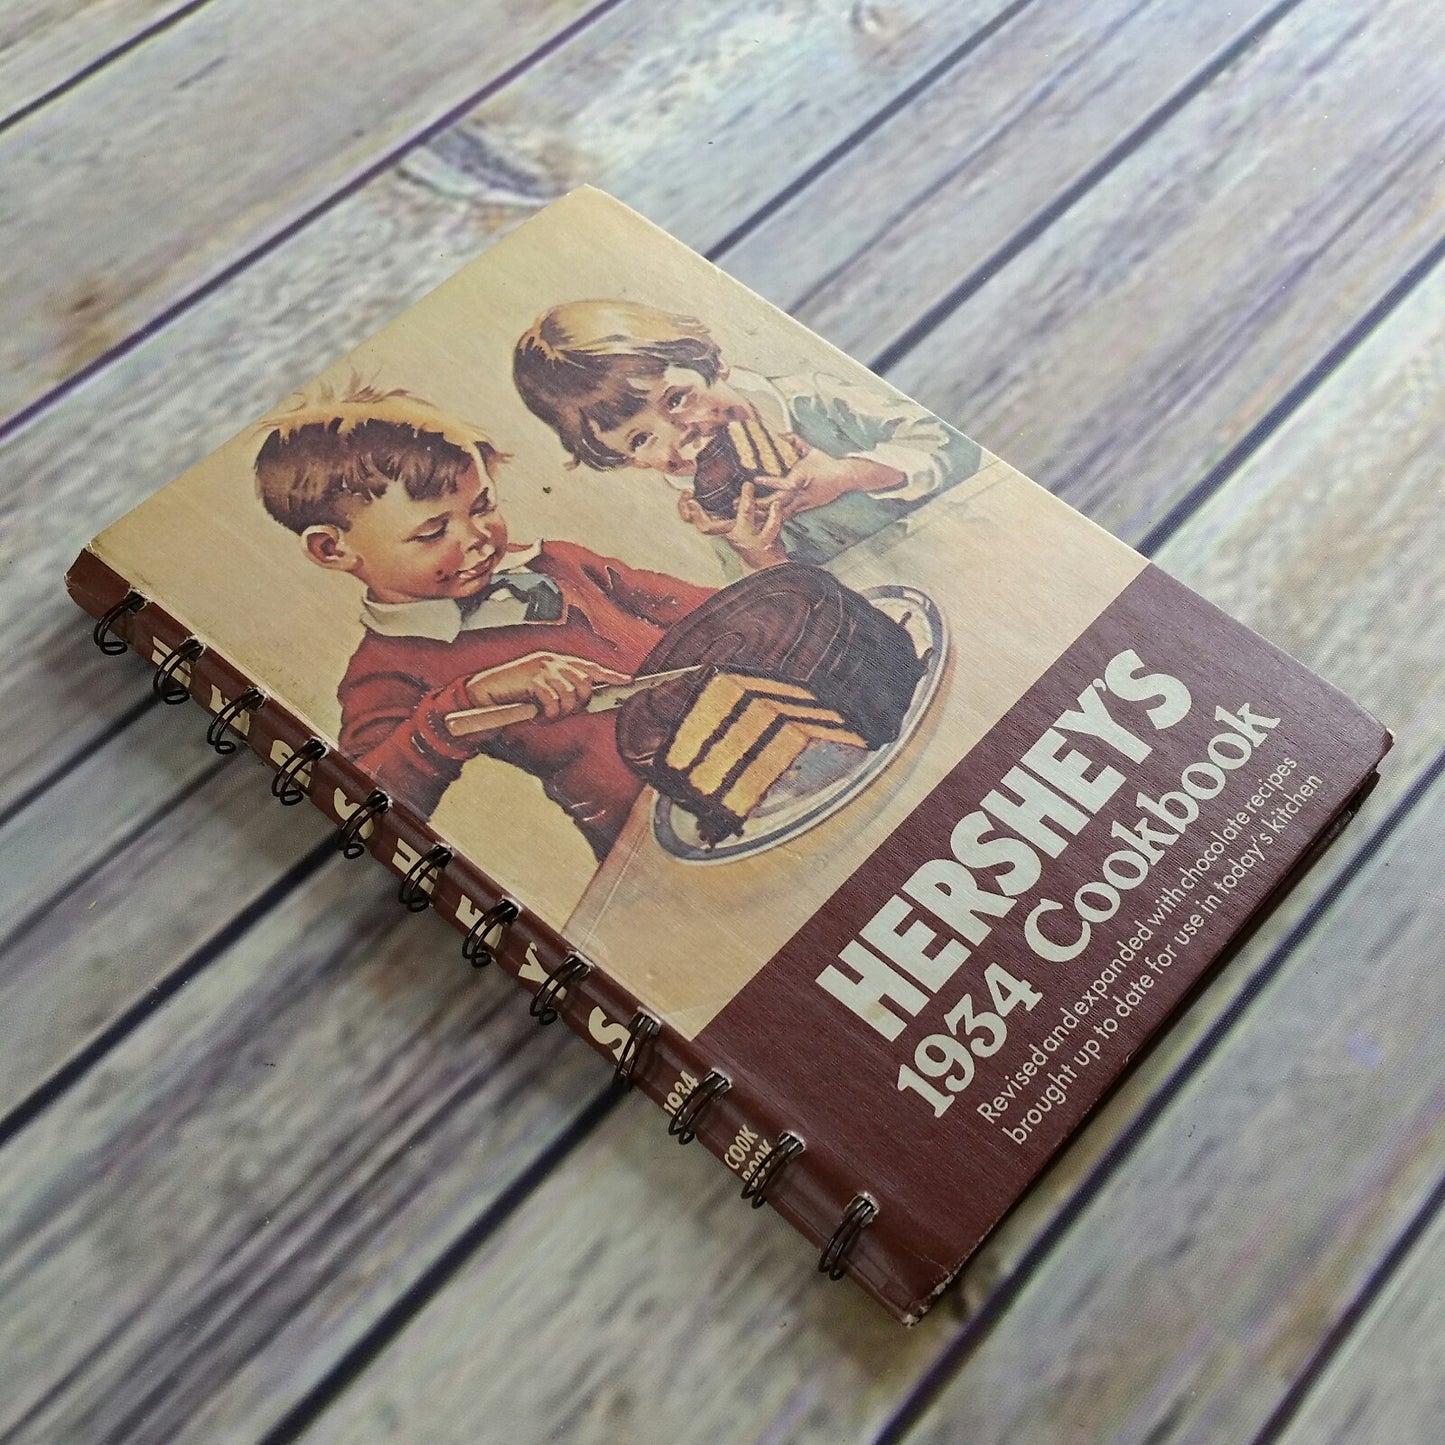 Vintage Cookbook Hersheys 1934 1971 Hardcover Eleventh Printing Revised and Expanded Cocoa Chocolate Promo Recipes - At Grandma's Table